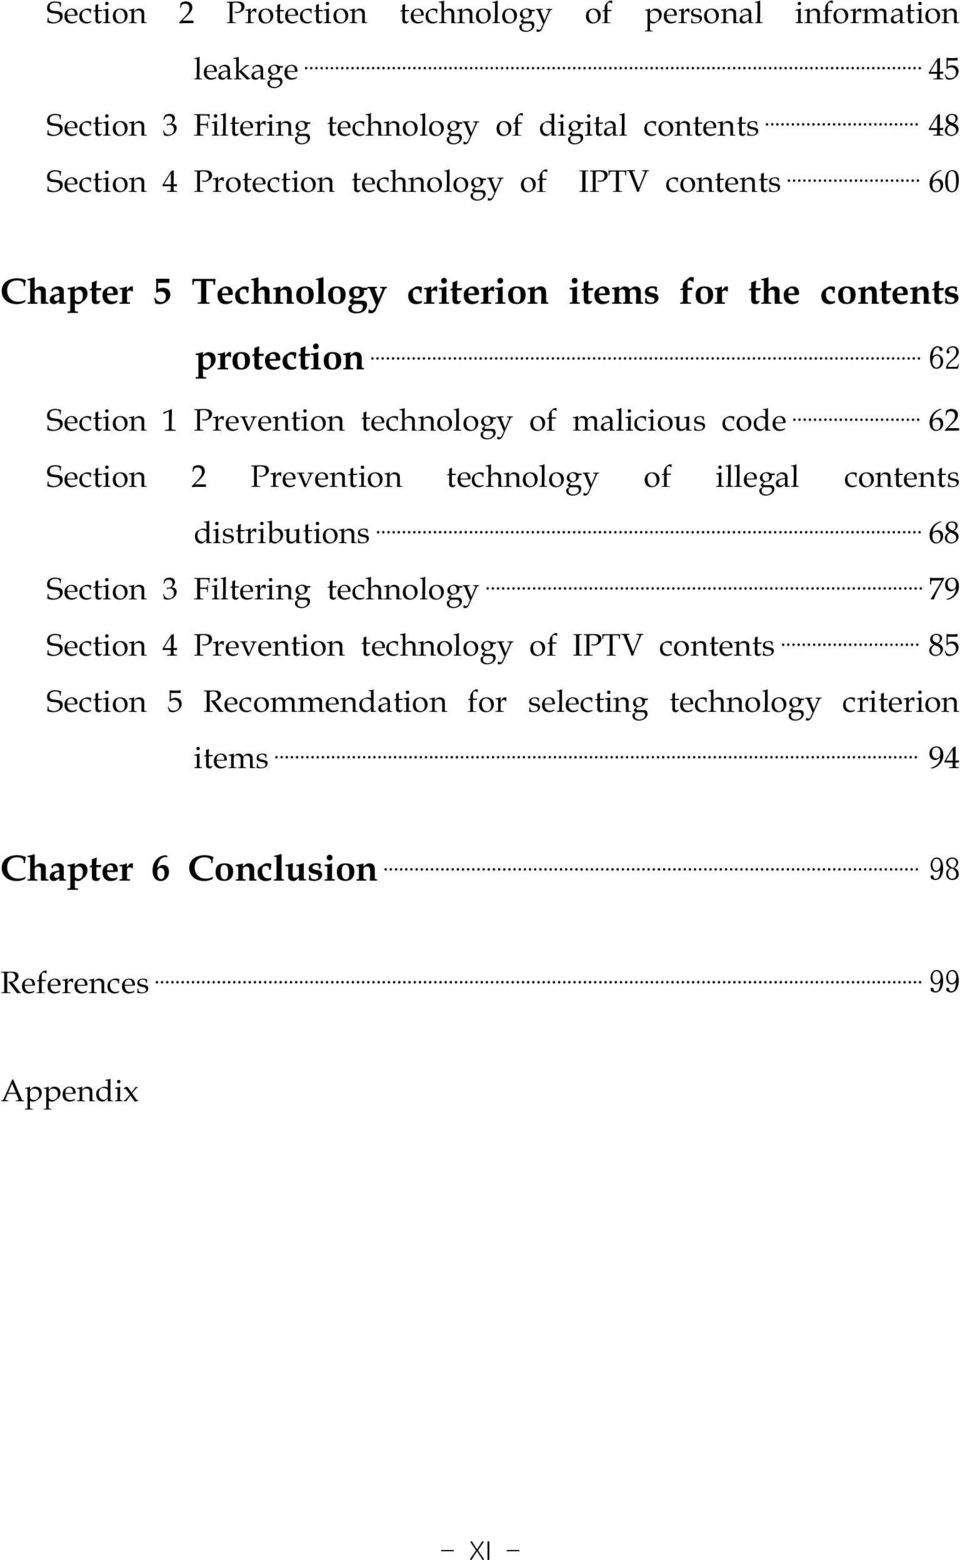 malicious code 62 Section 2 Prevention technology of illegal contents distributions 68 Section 3 Filtering technology 79 Section 4 Prevention